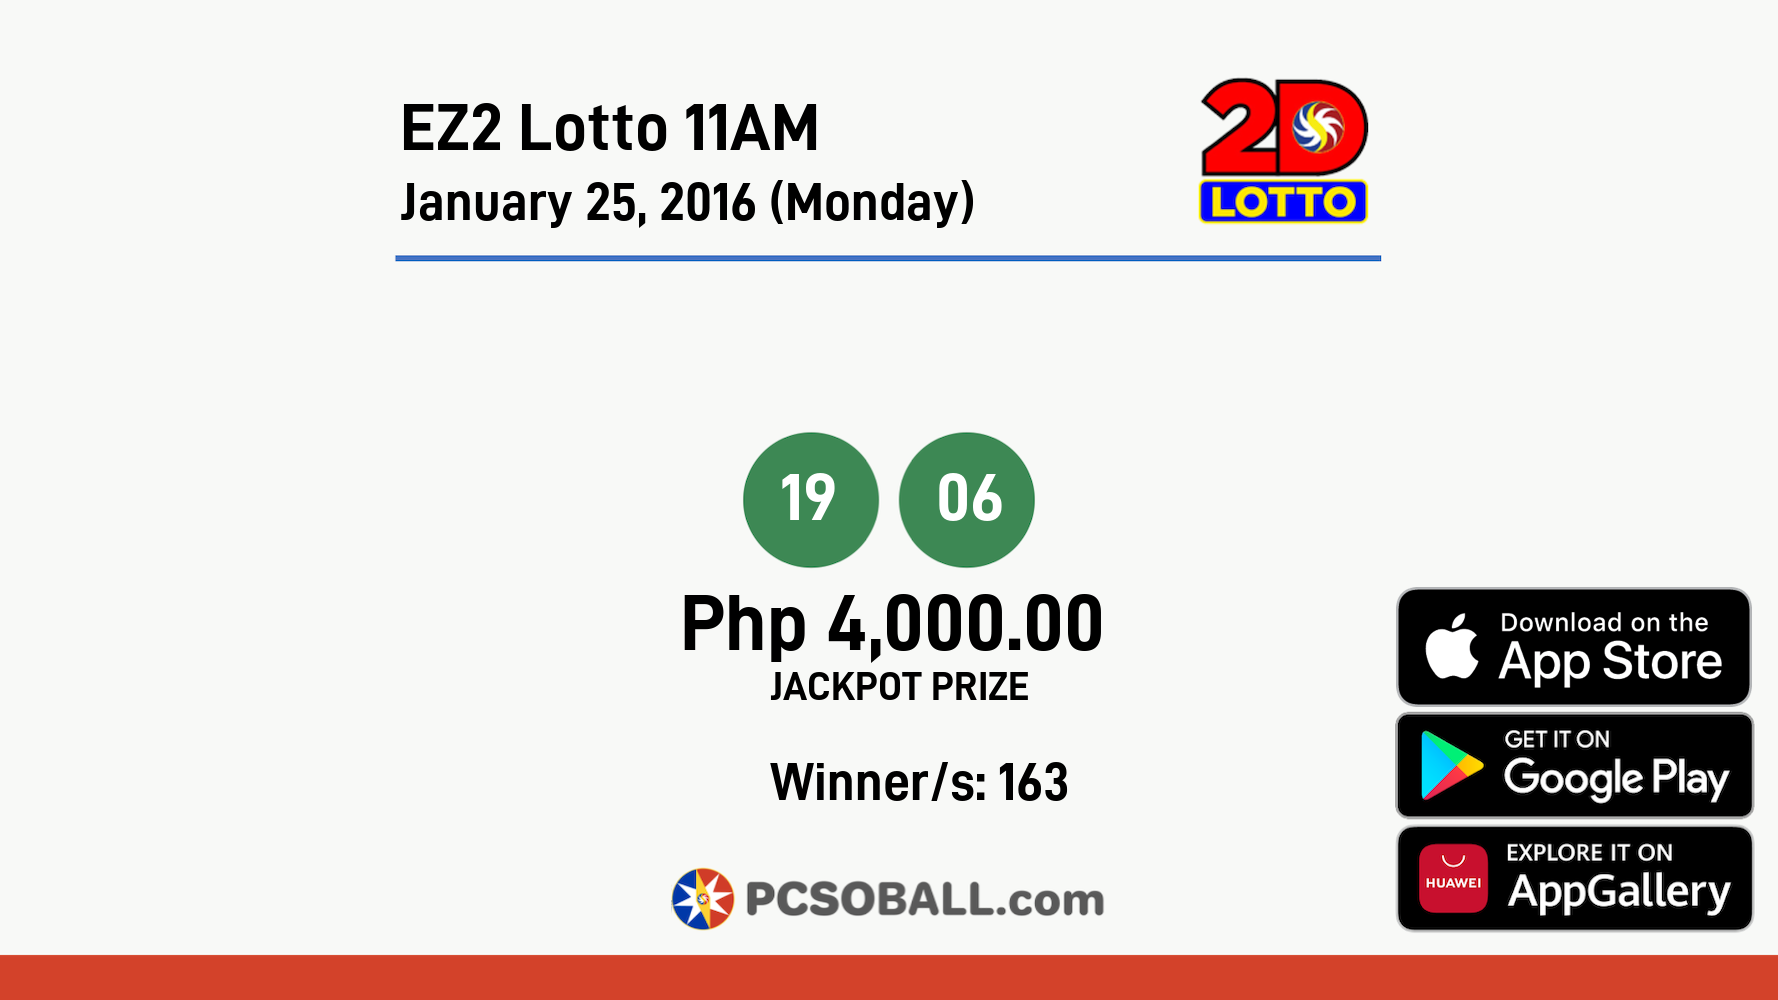 EZ2 Lotto 11AM January 25, 2016 (Monday) Result